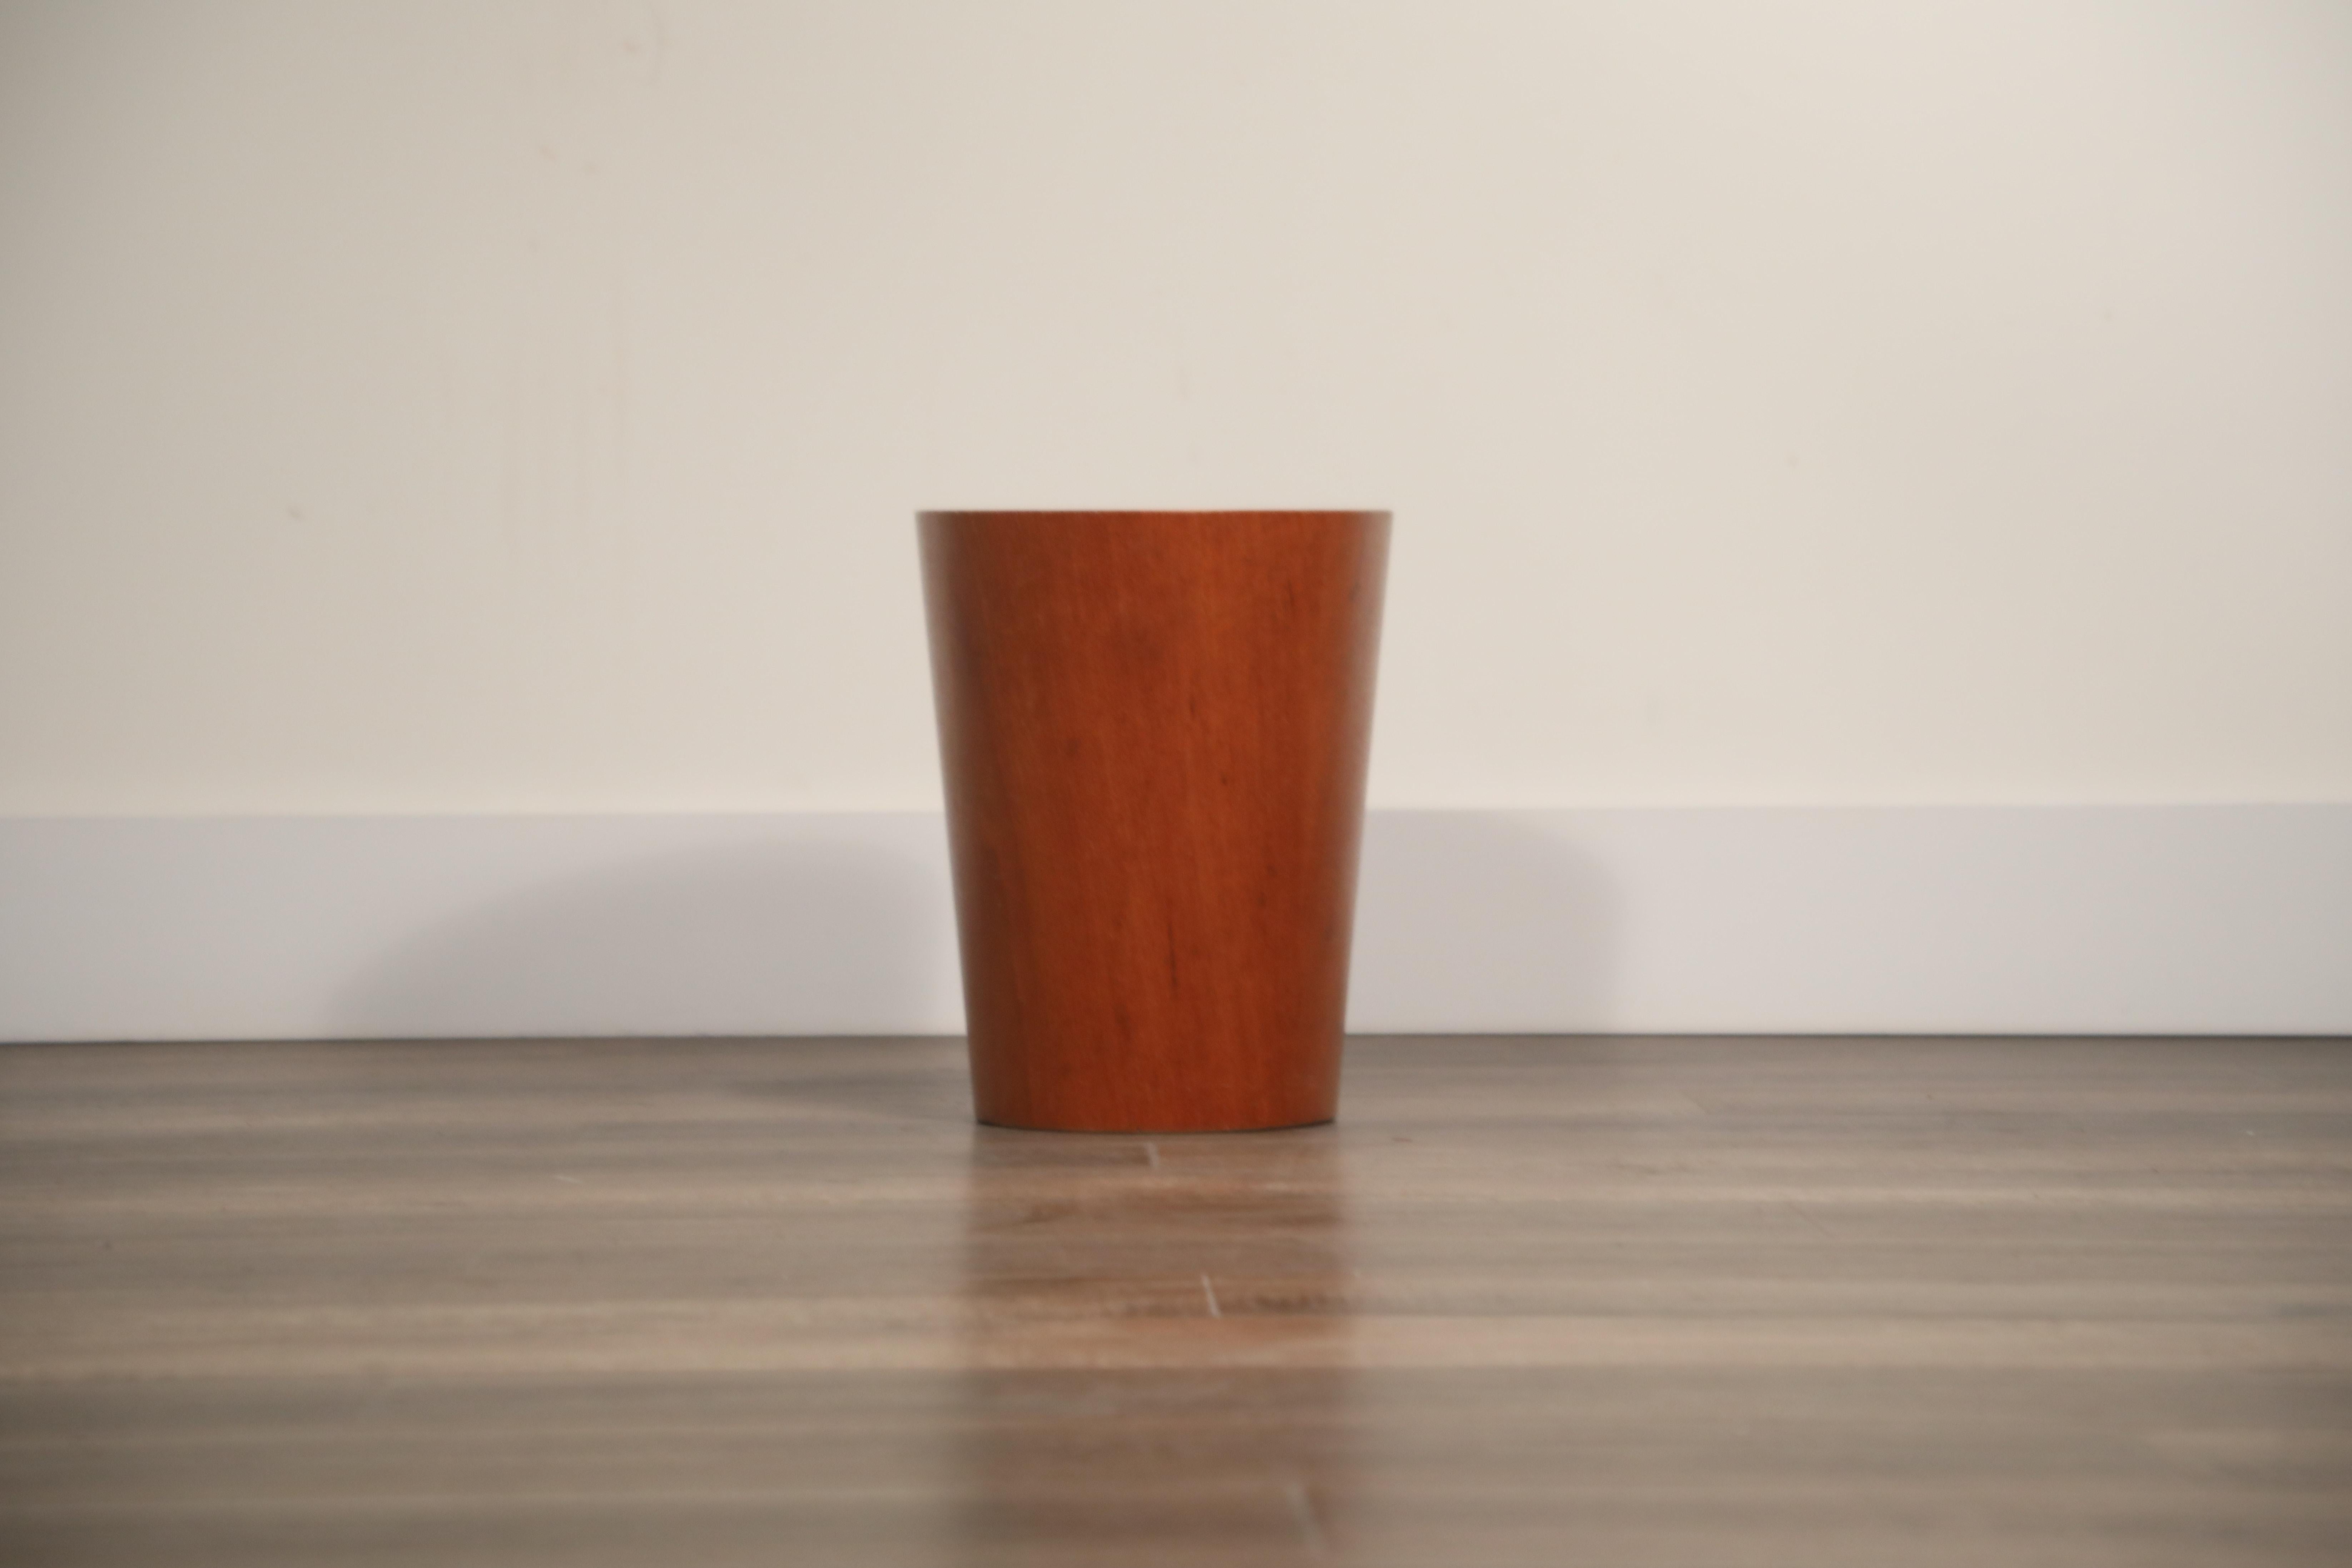 A classy teak circular paper or waste basket by Martin Åberg for Servex or House of Rainbow Wood Products, Sweden, circa 1955. Underneath this trash bin is the original makers mark.

Good vintage condition with slight wear such as scratches and